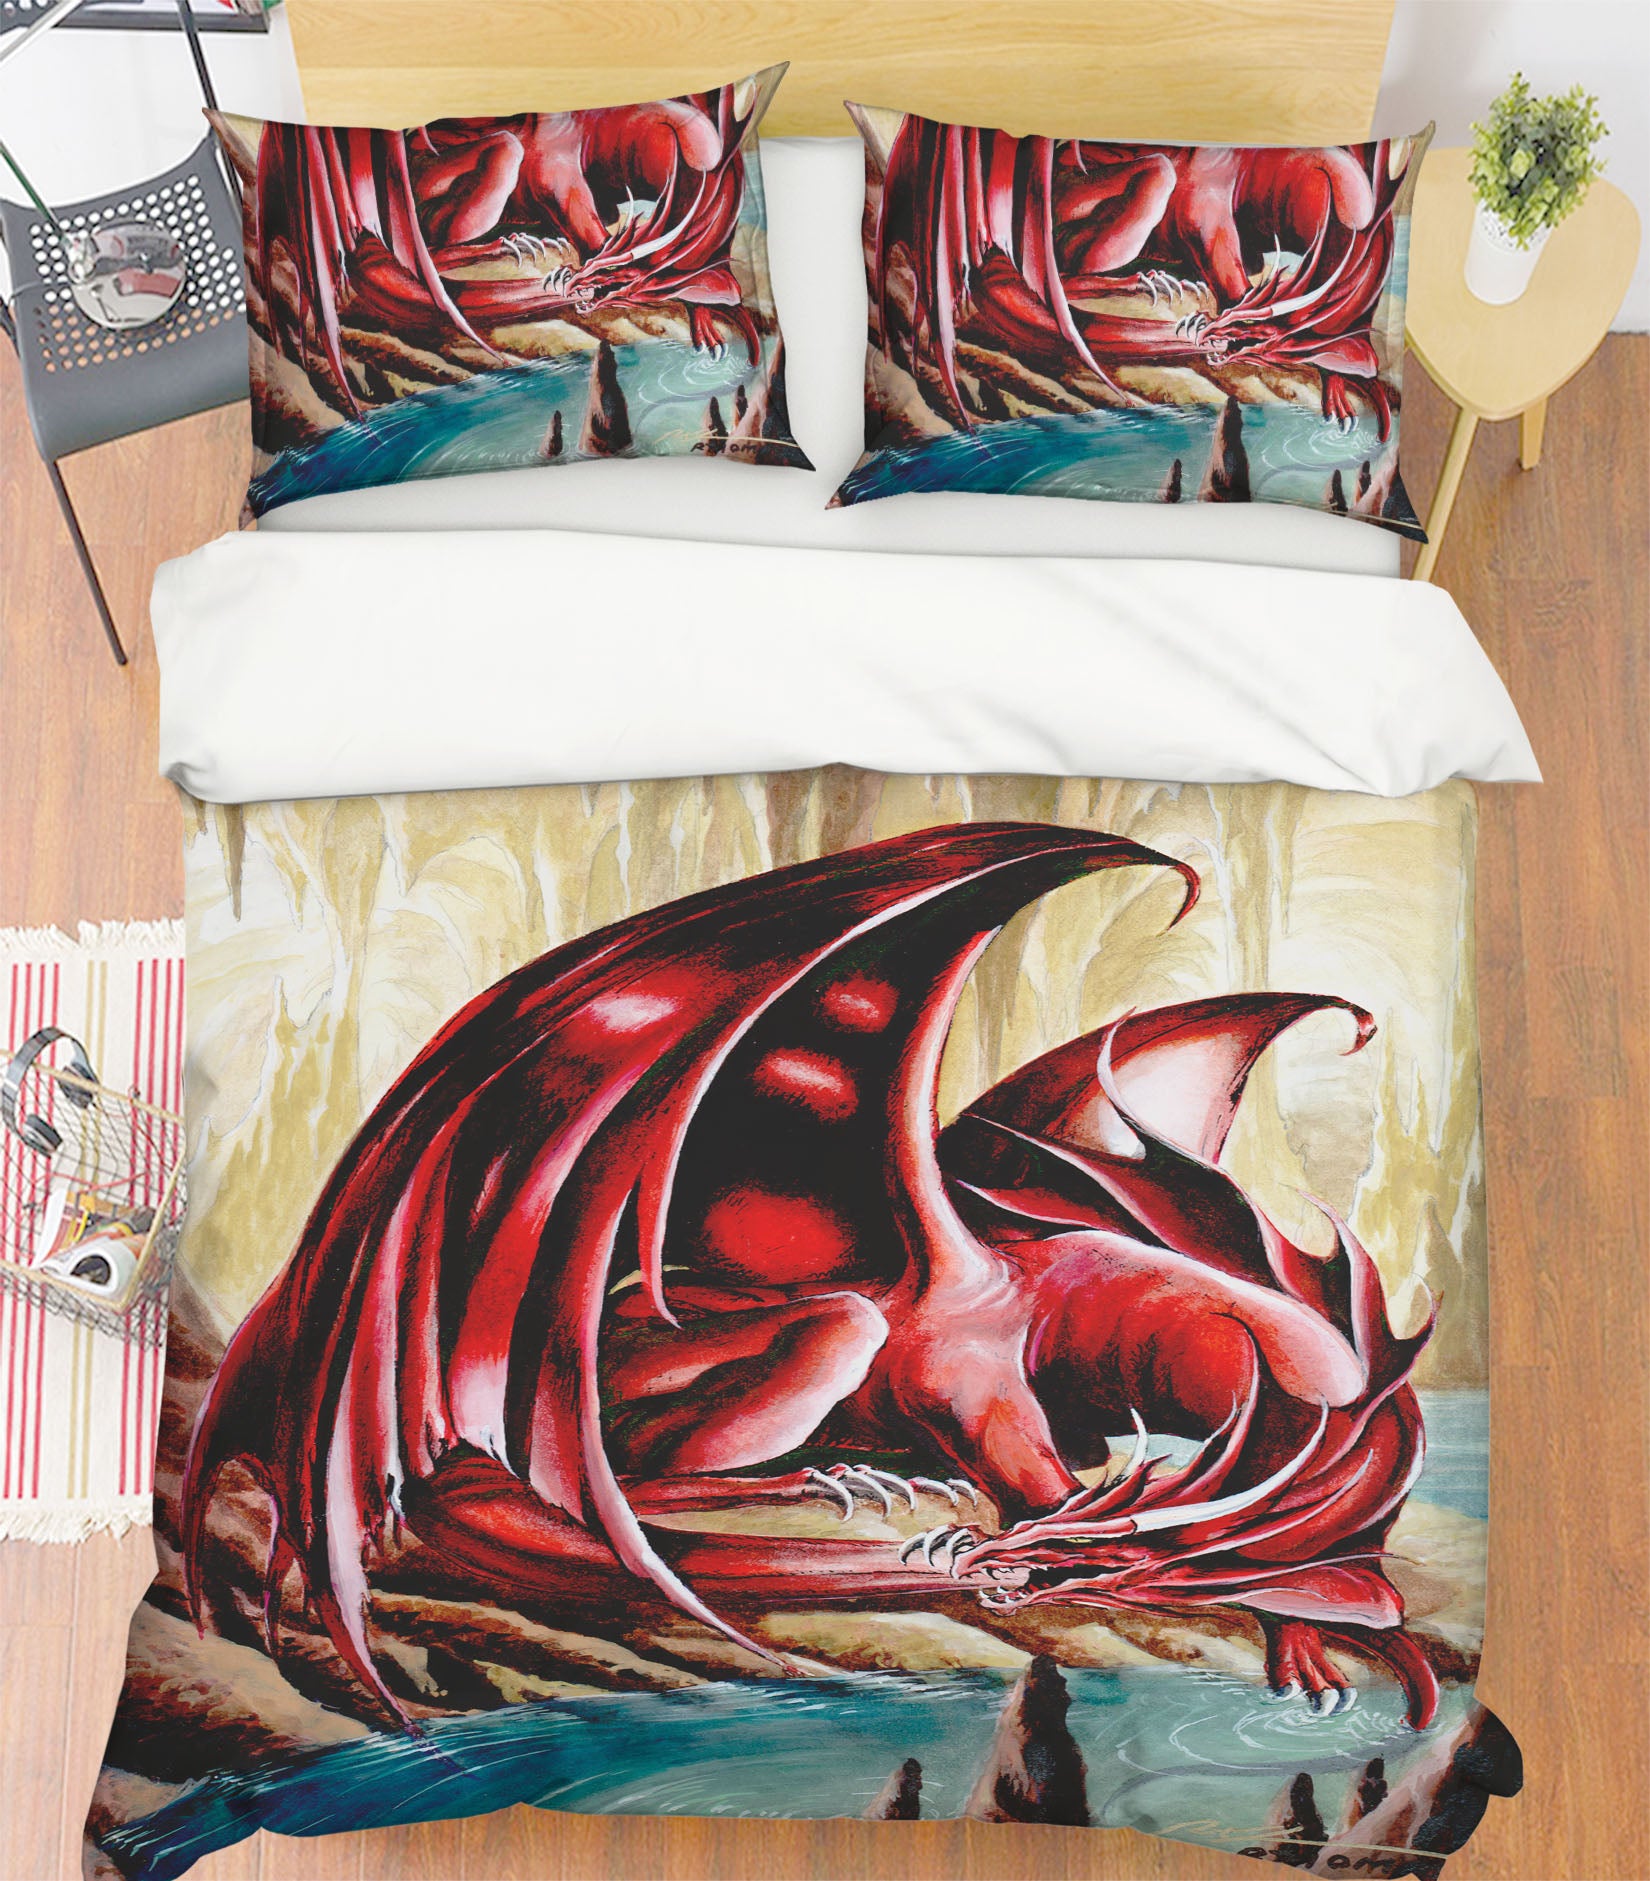 3D Red Dragon 8330 Ruth Thompson Bedding Bed Pillowcases Quilt Cover Duvet Cover